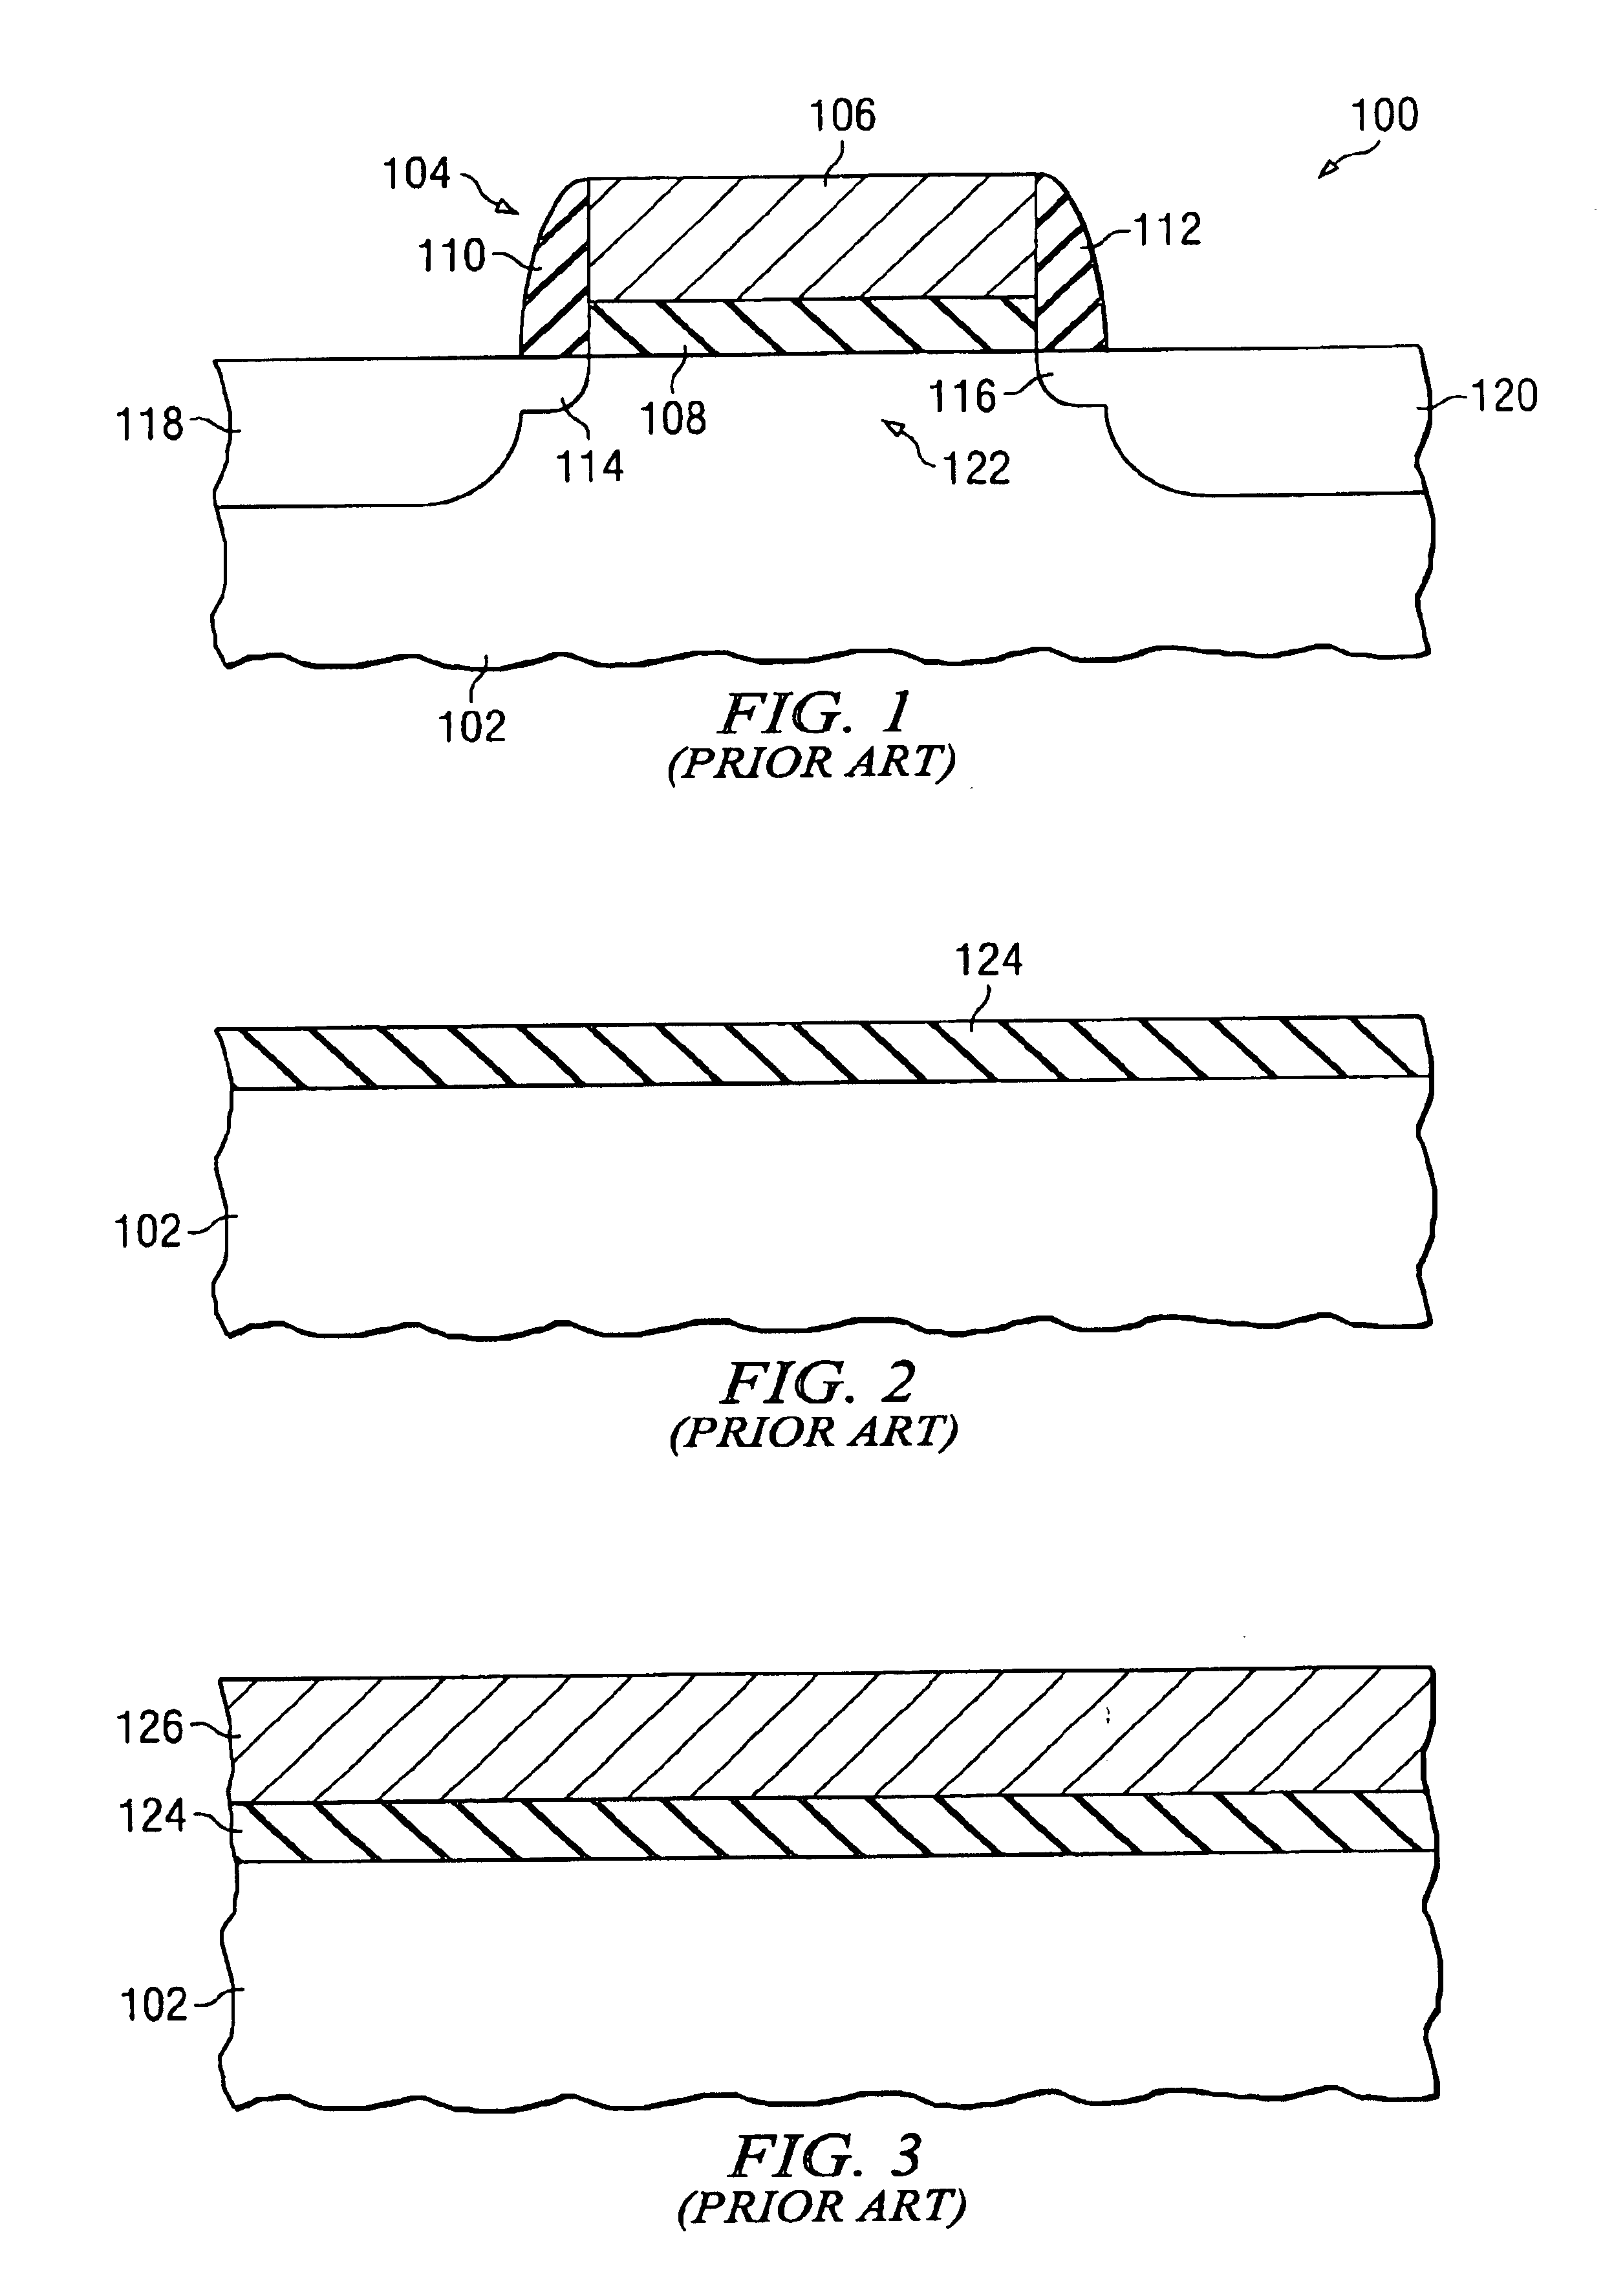 Process method of source drain spacer engineering to improve transistor capacitance